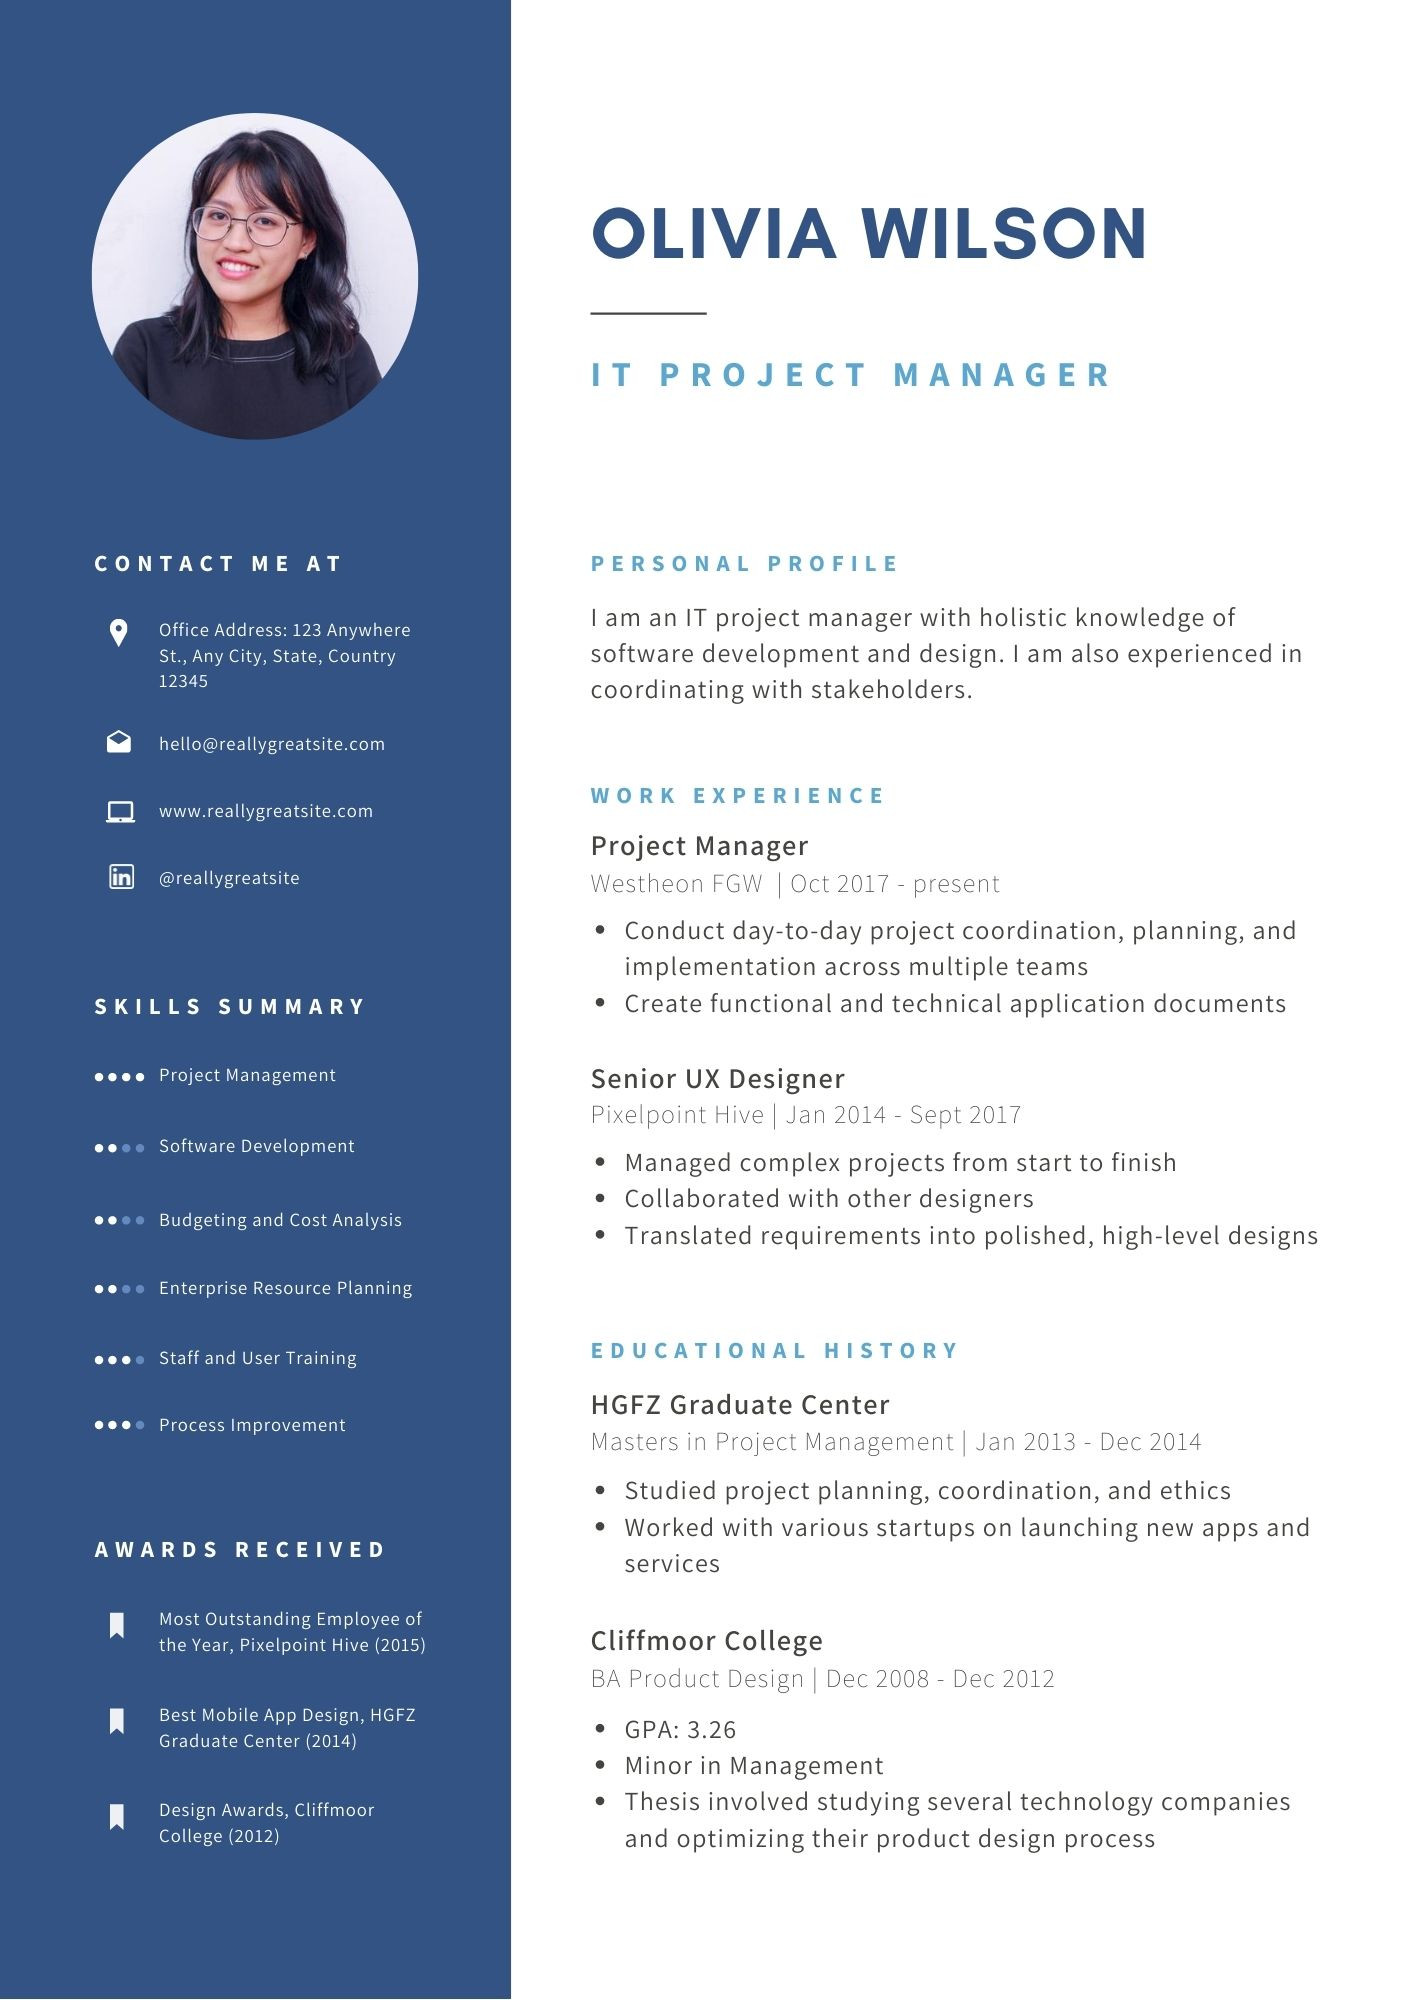 Mba Finance Resume Samples for Experienced Mba Resume Samples for Creating Eye-catchy Professional Resumes …